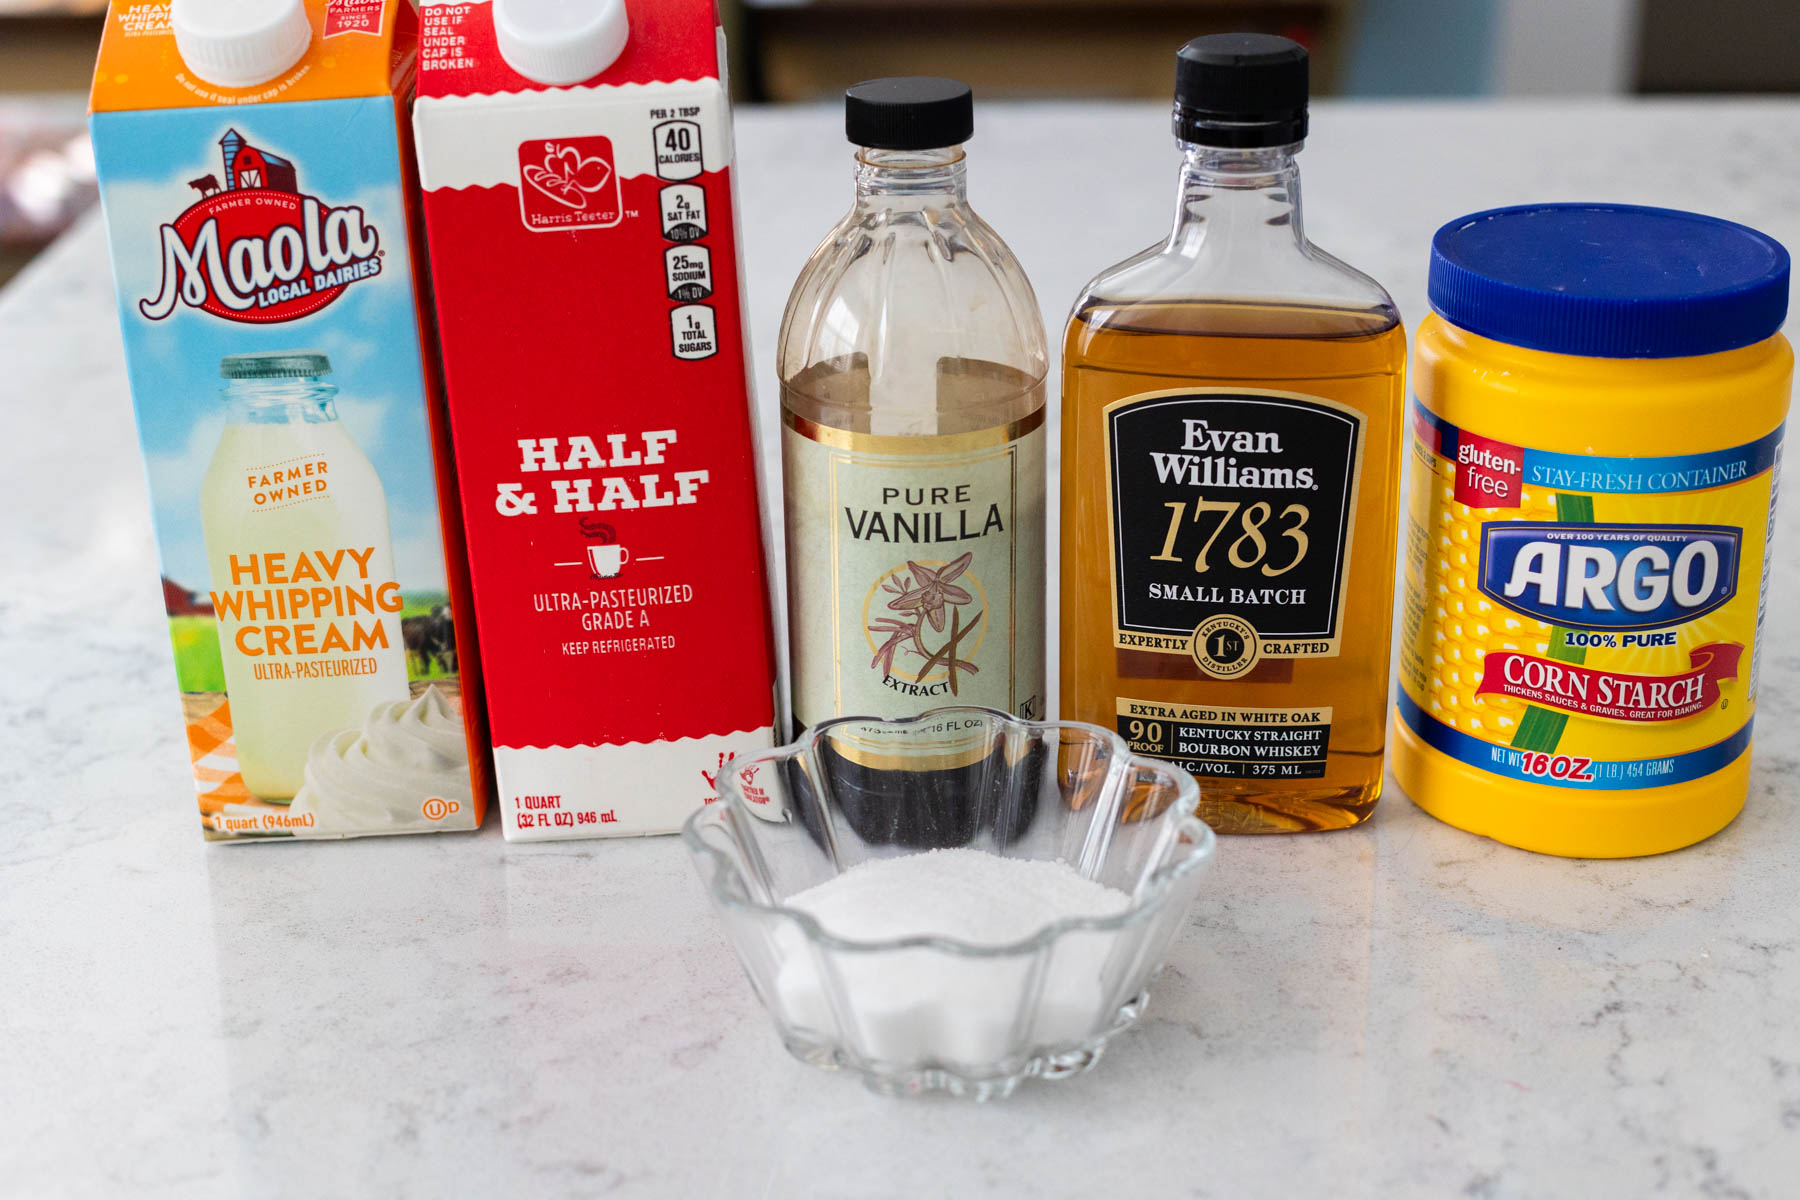 The ingredients to make bourbon sauce are on the counter.